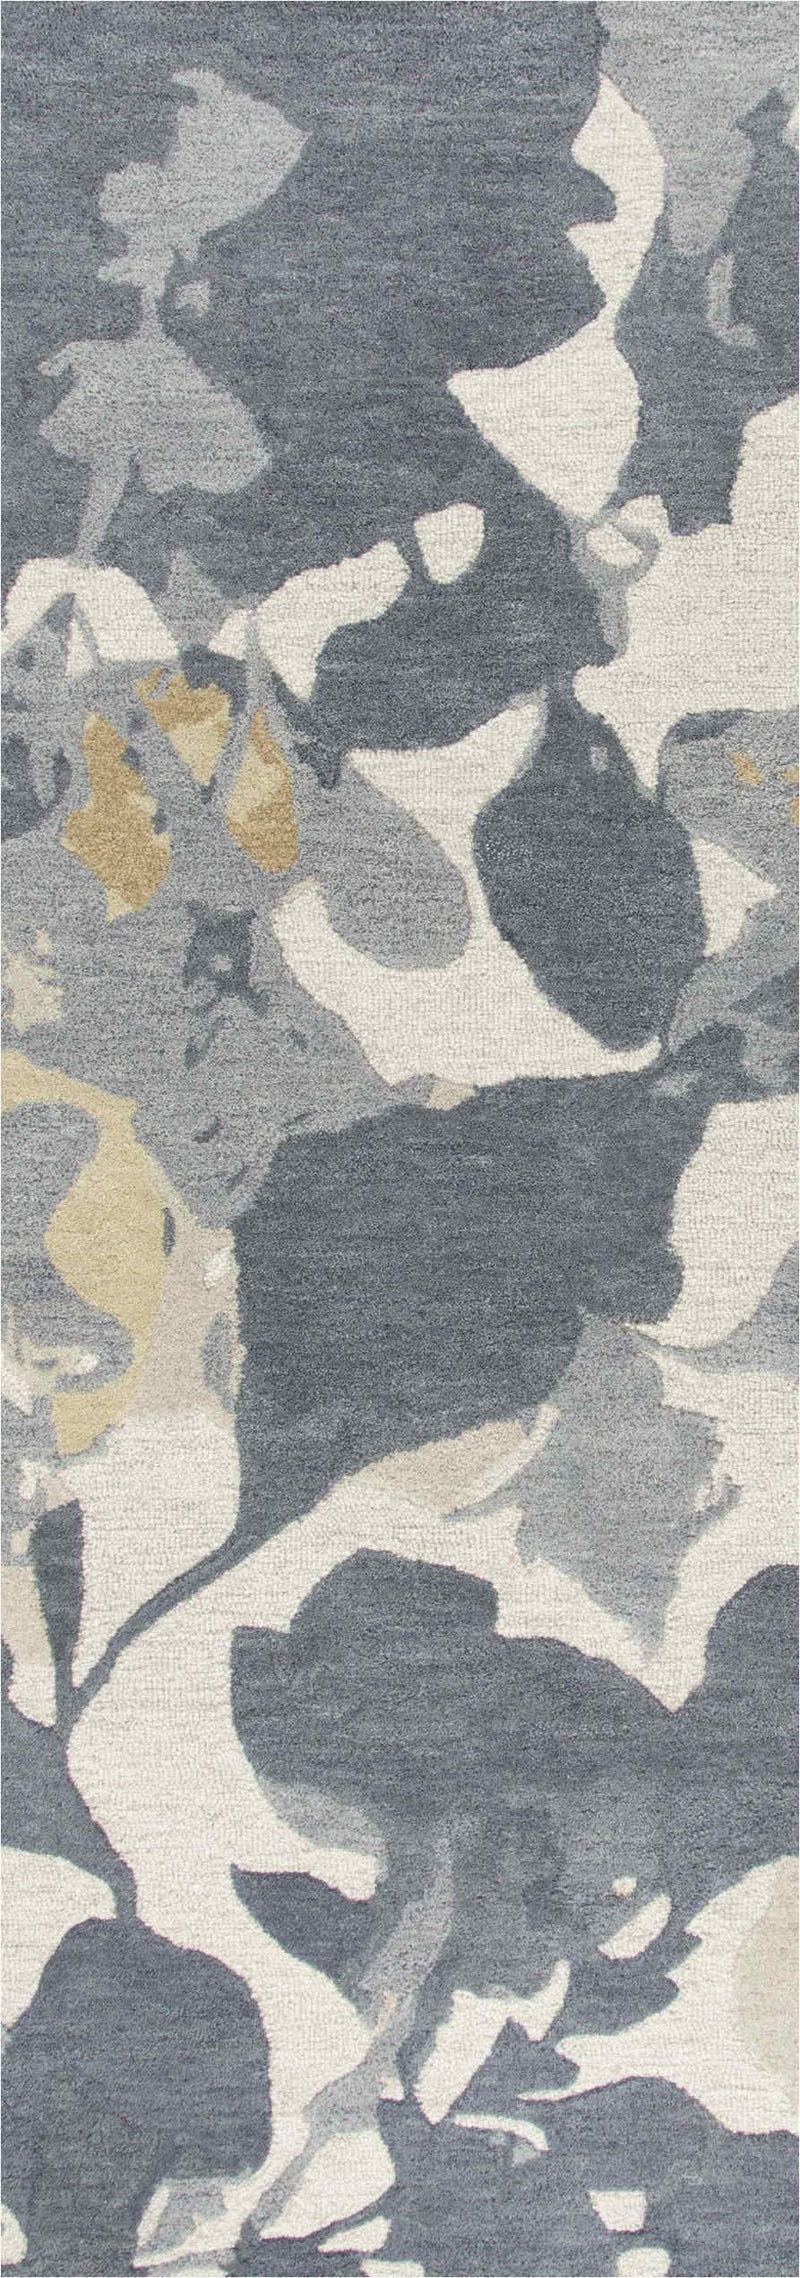 Rizzy Home Area Rugs Connie Post Area Rugs CNP106 Grey Modern 100% Wool With Unique Shapes